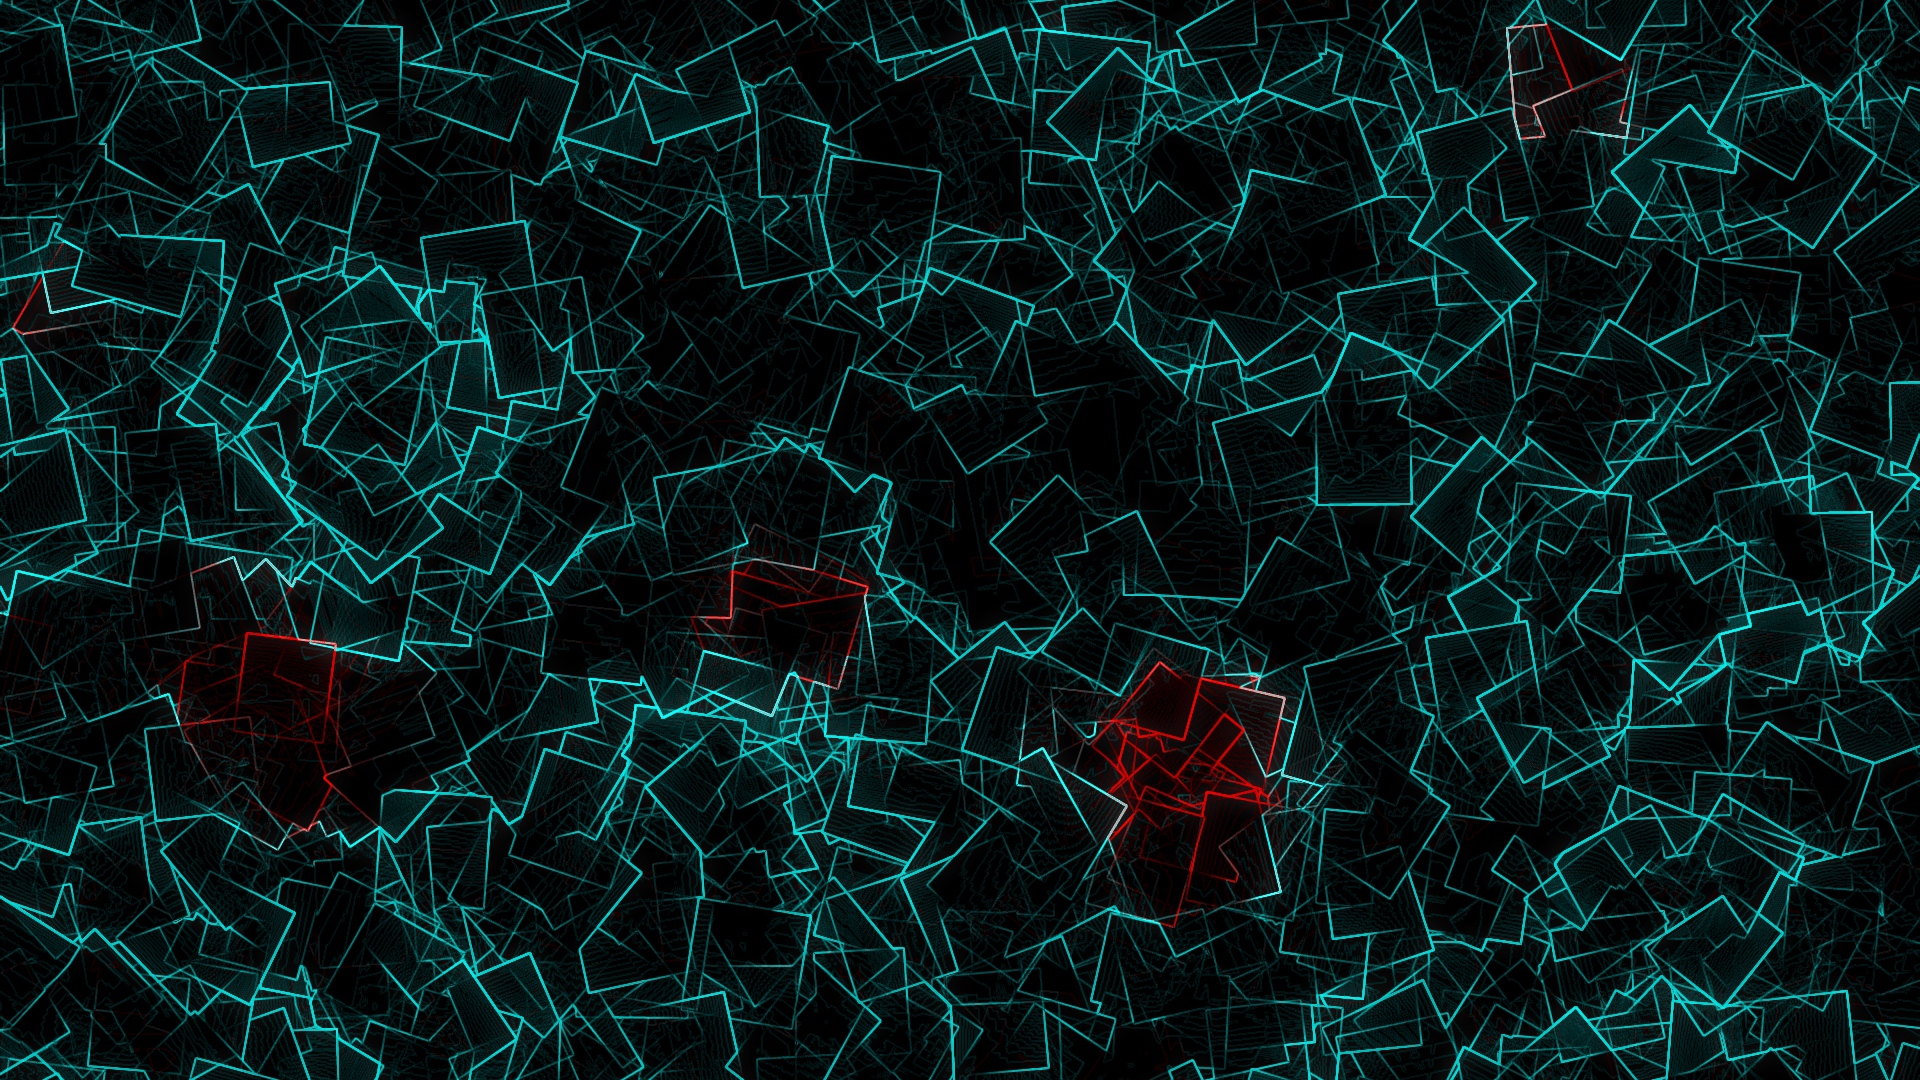  Abstraction Teal Red Maze Wallpaper Background Full HD 1080p